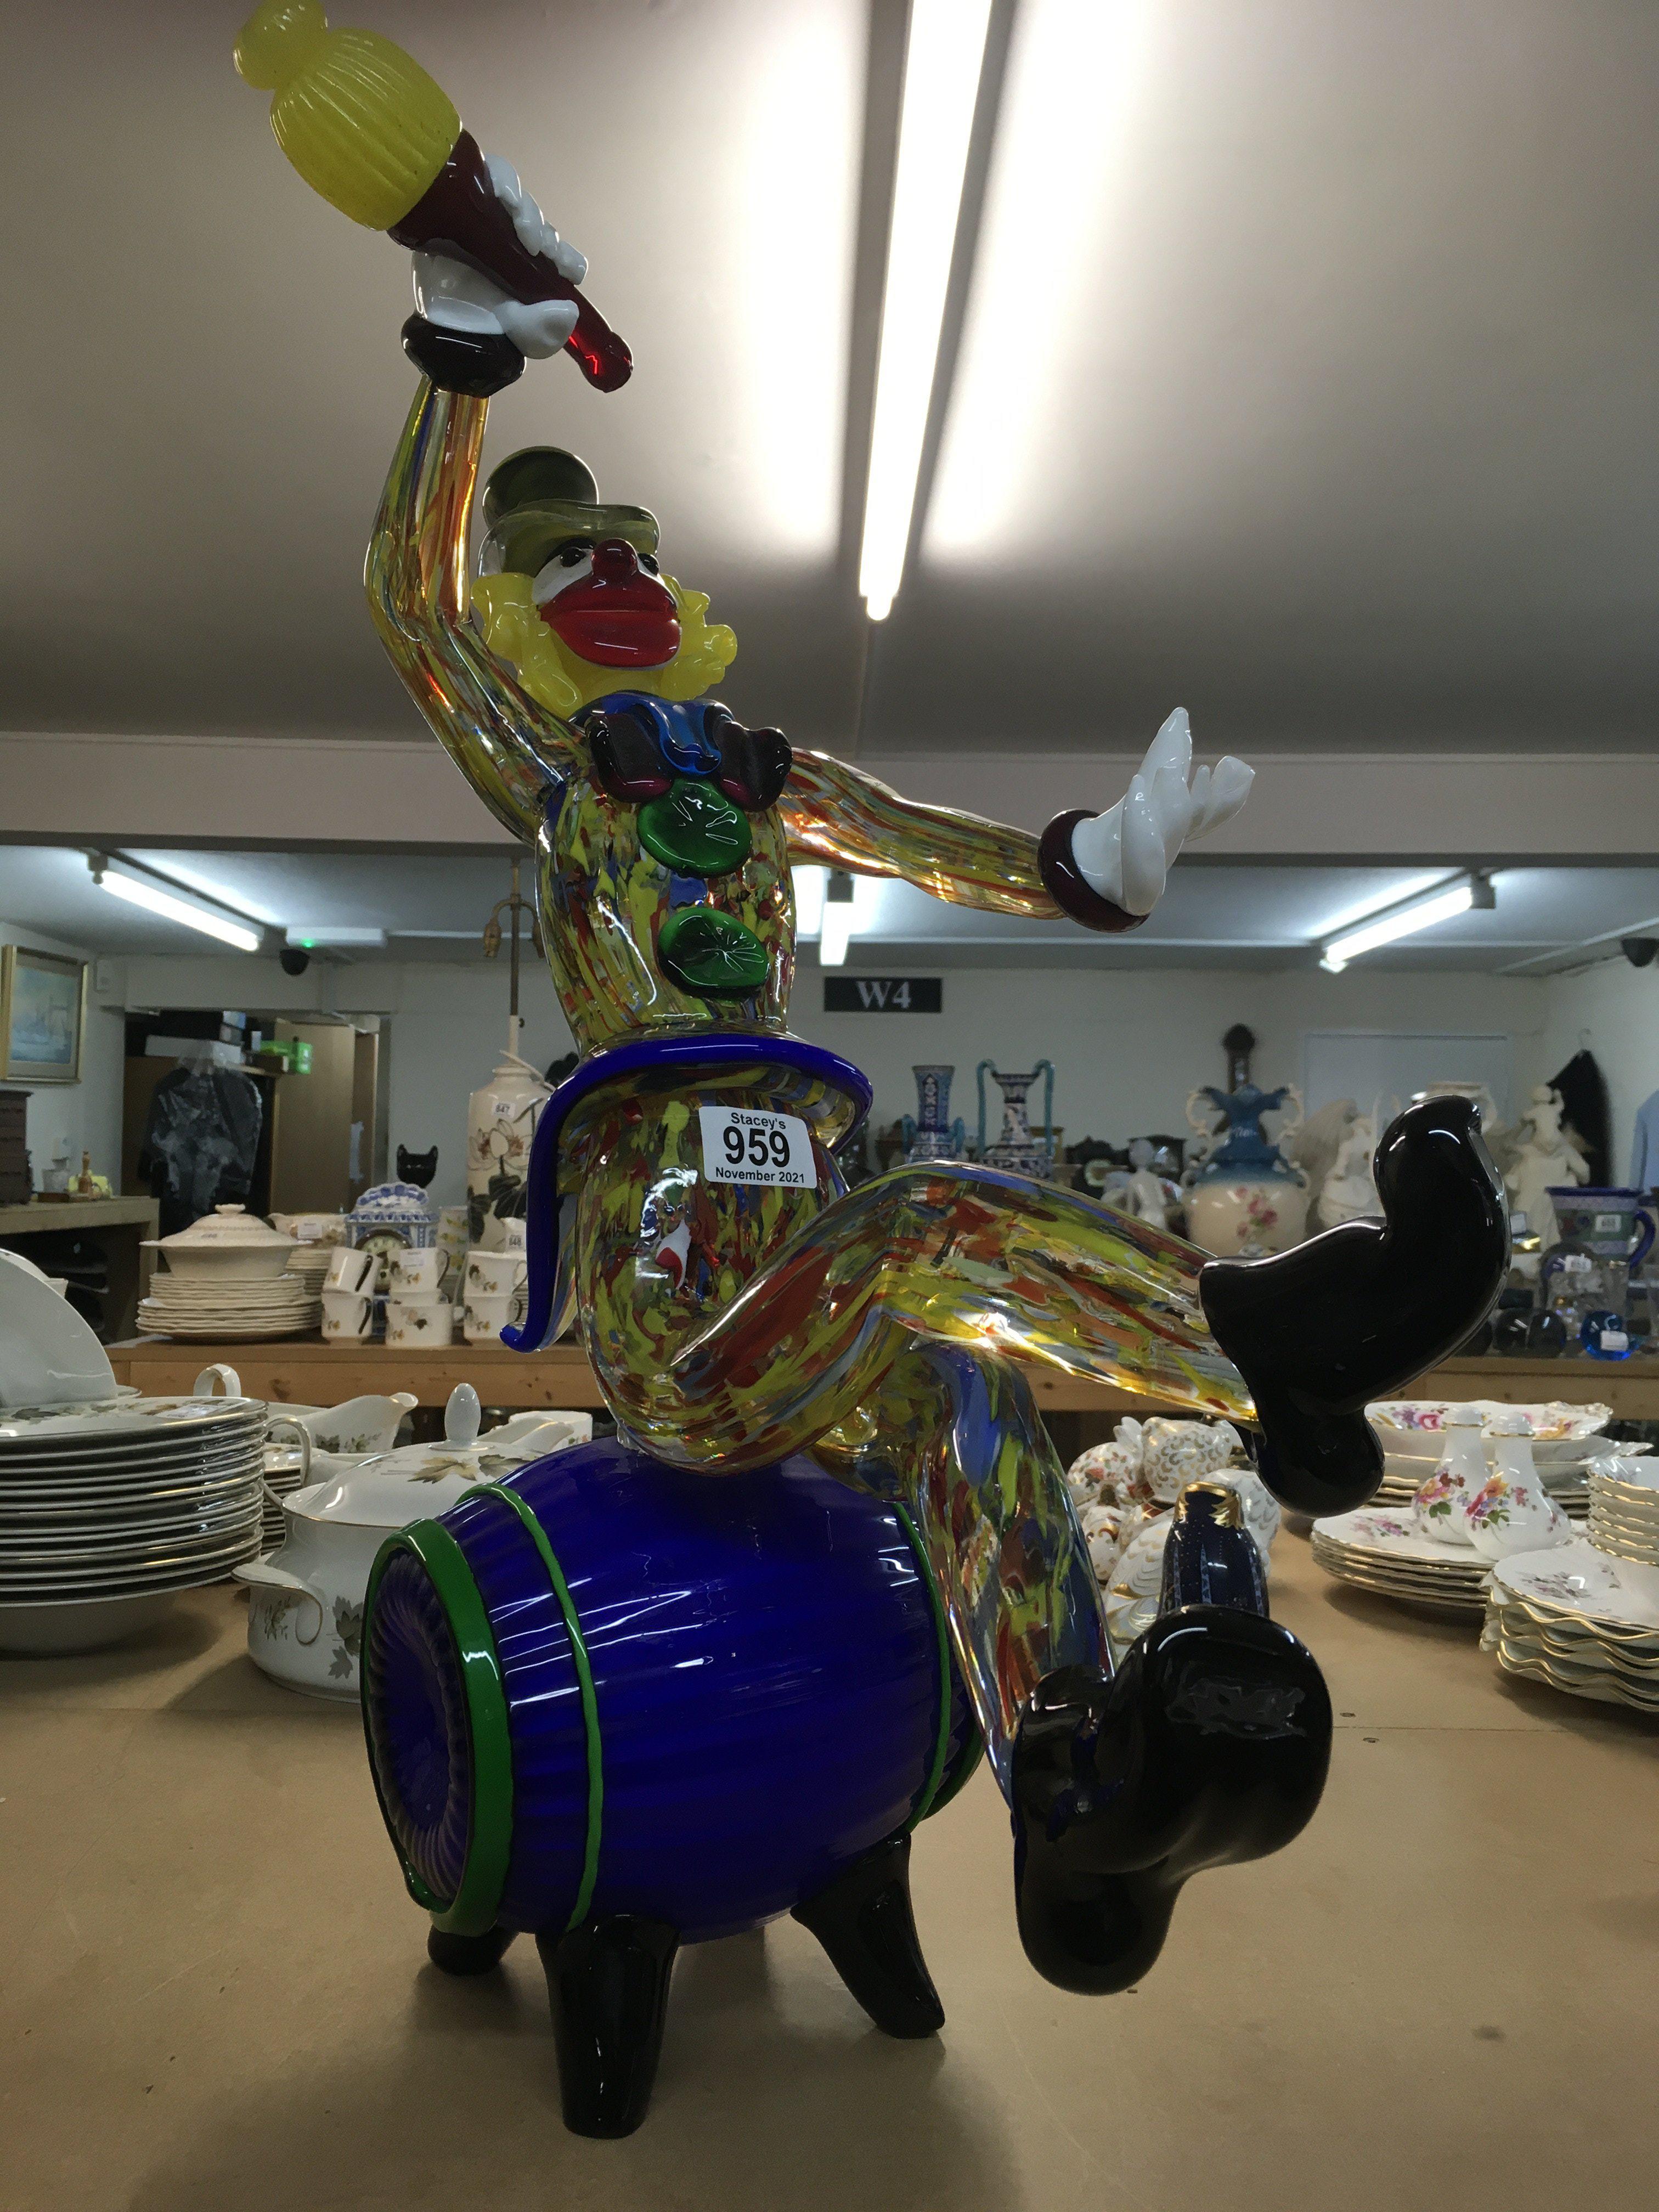 A Large Murano glass clown seated on a glass barre